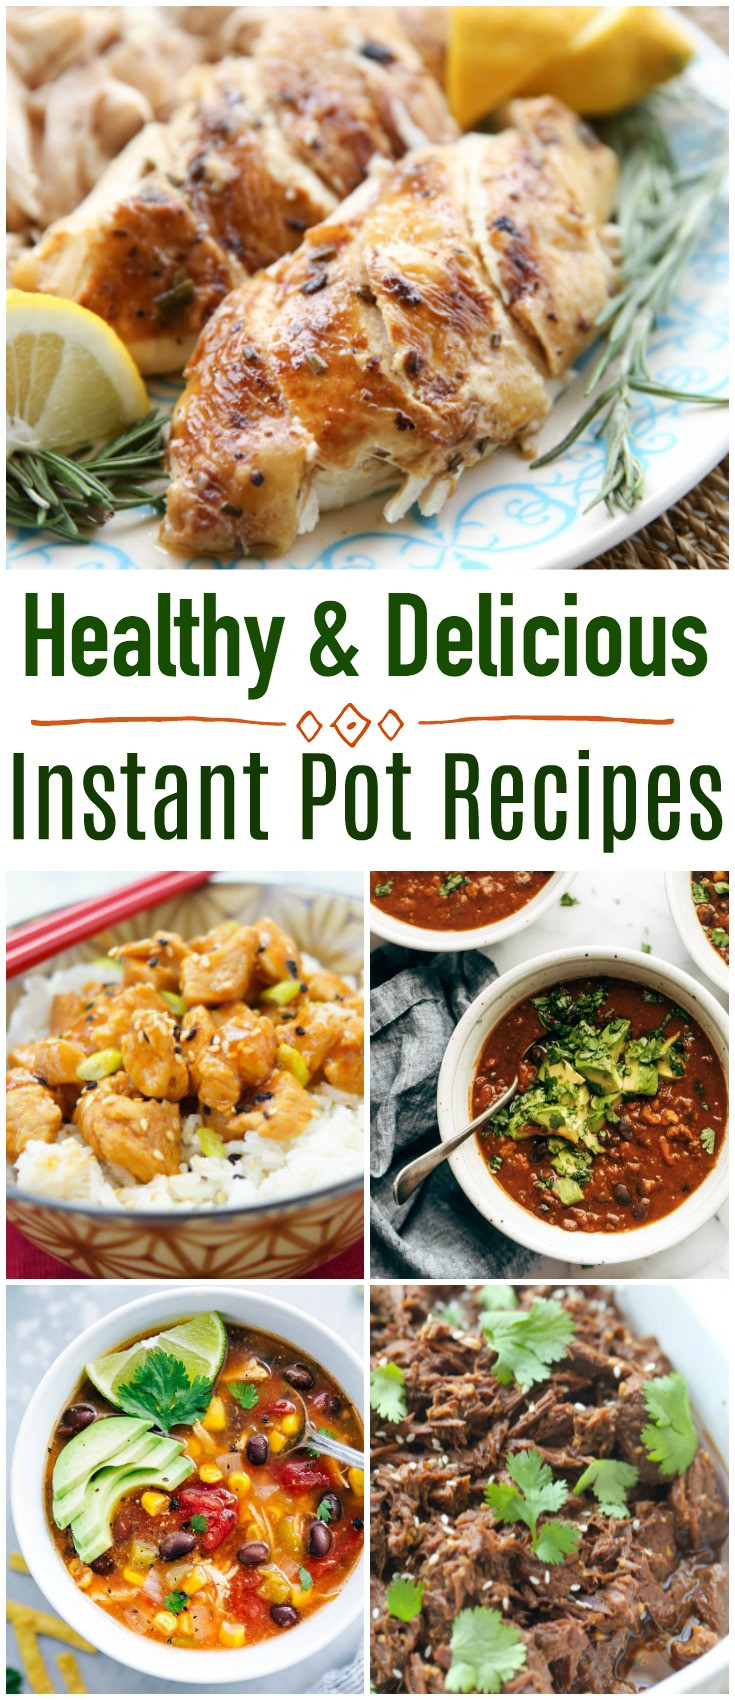 Delicious Instant Pot Recipes New Healthy and Delicious Recipes for the Instant Pot